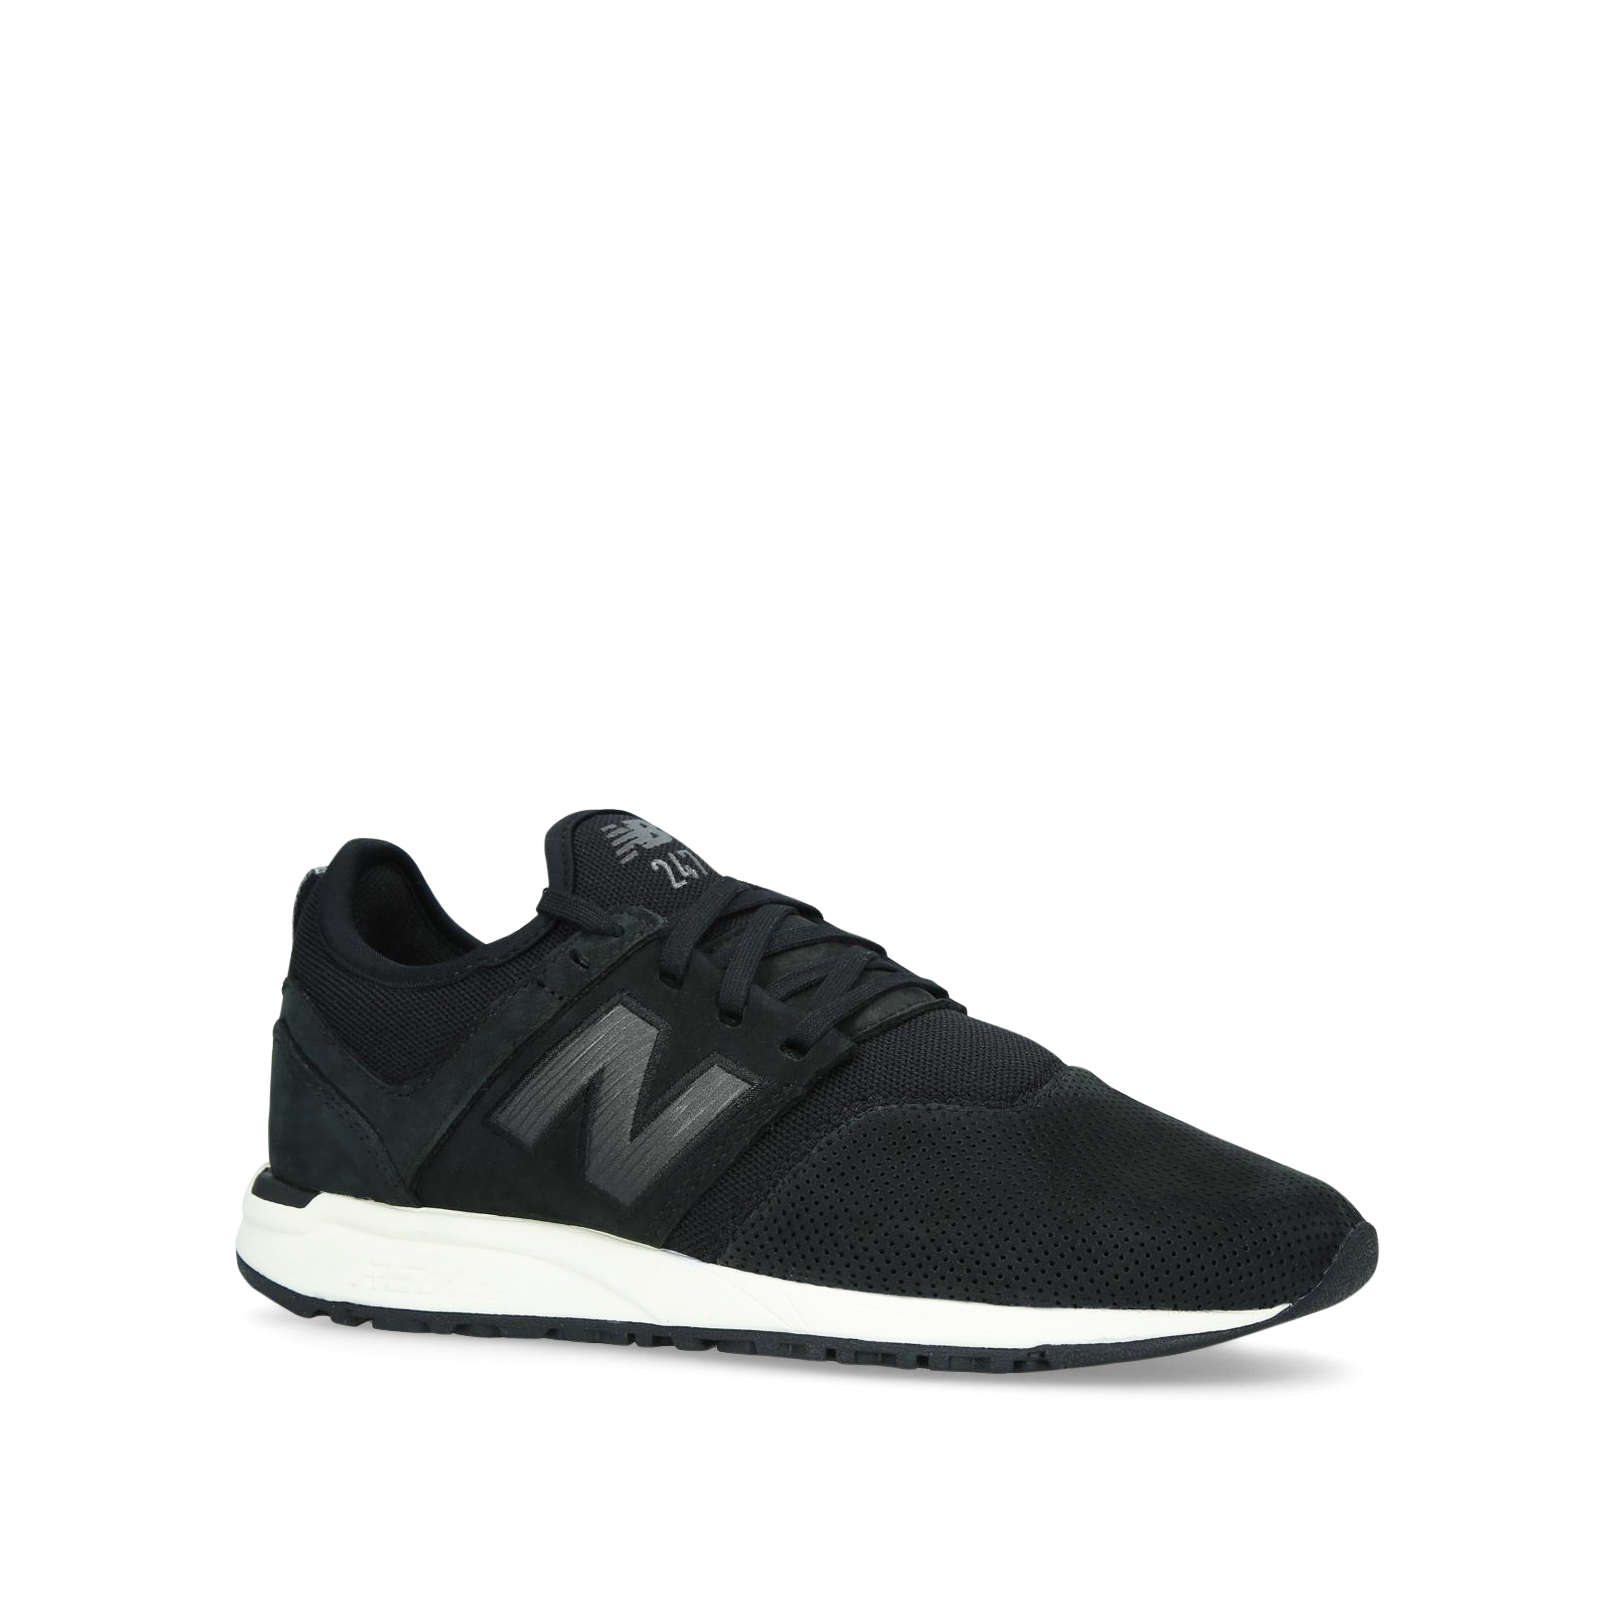 CLASSIC 247 - NEW BALANCE Sneakers